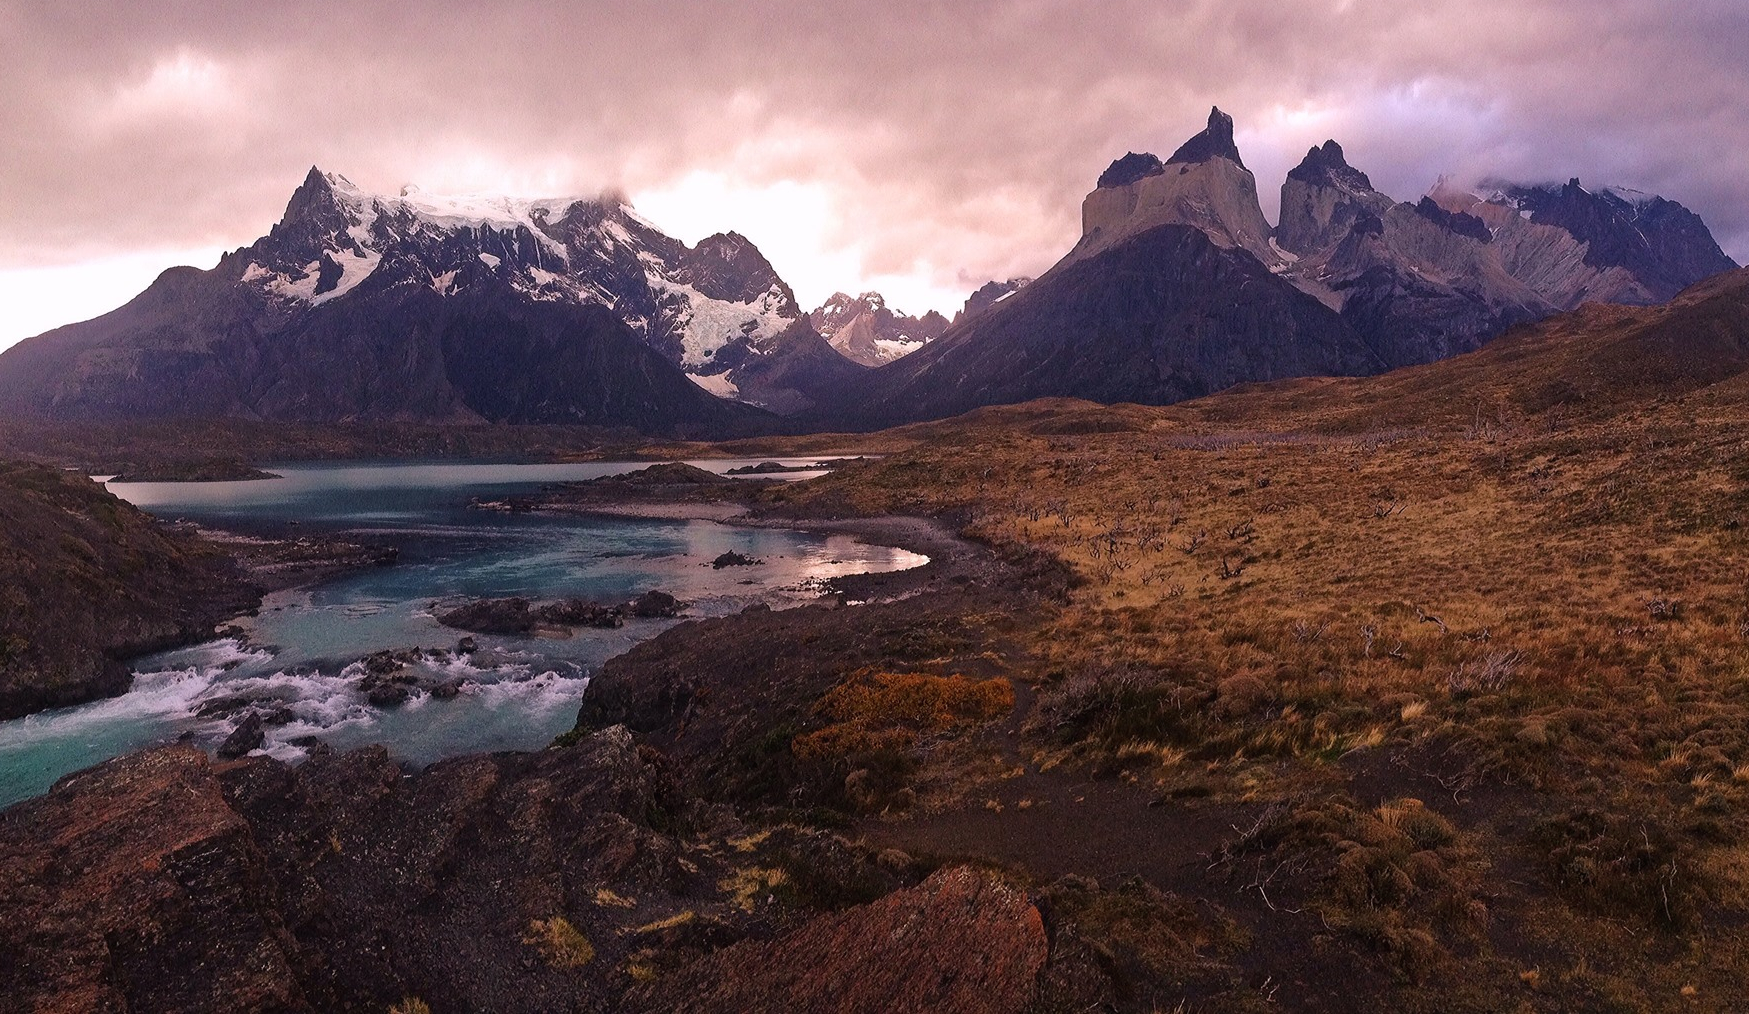 Parque Nacional Torre sdel Pain, Chile by Ian Oechsle